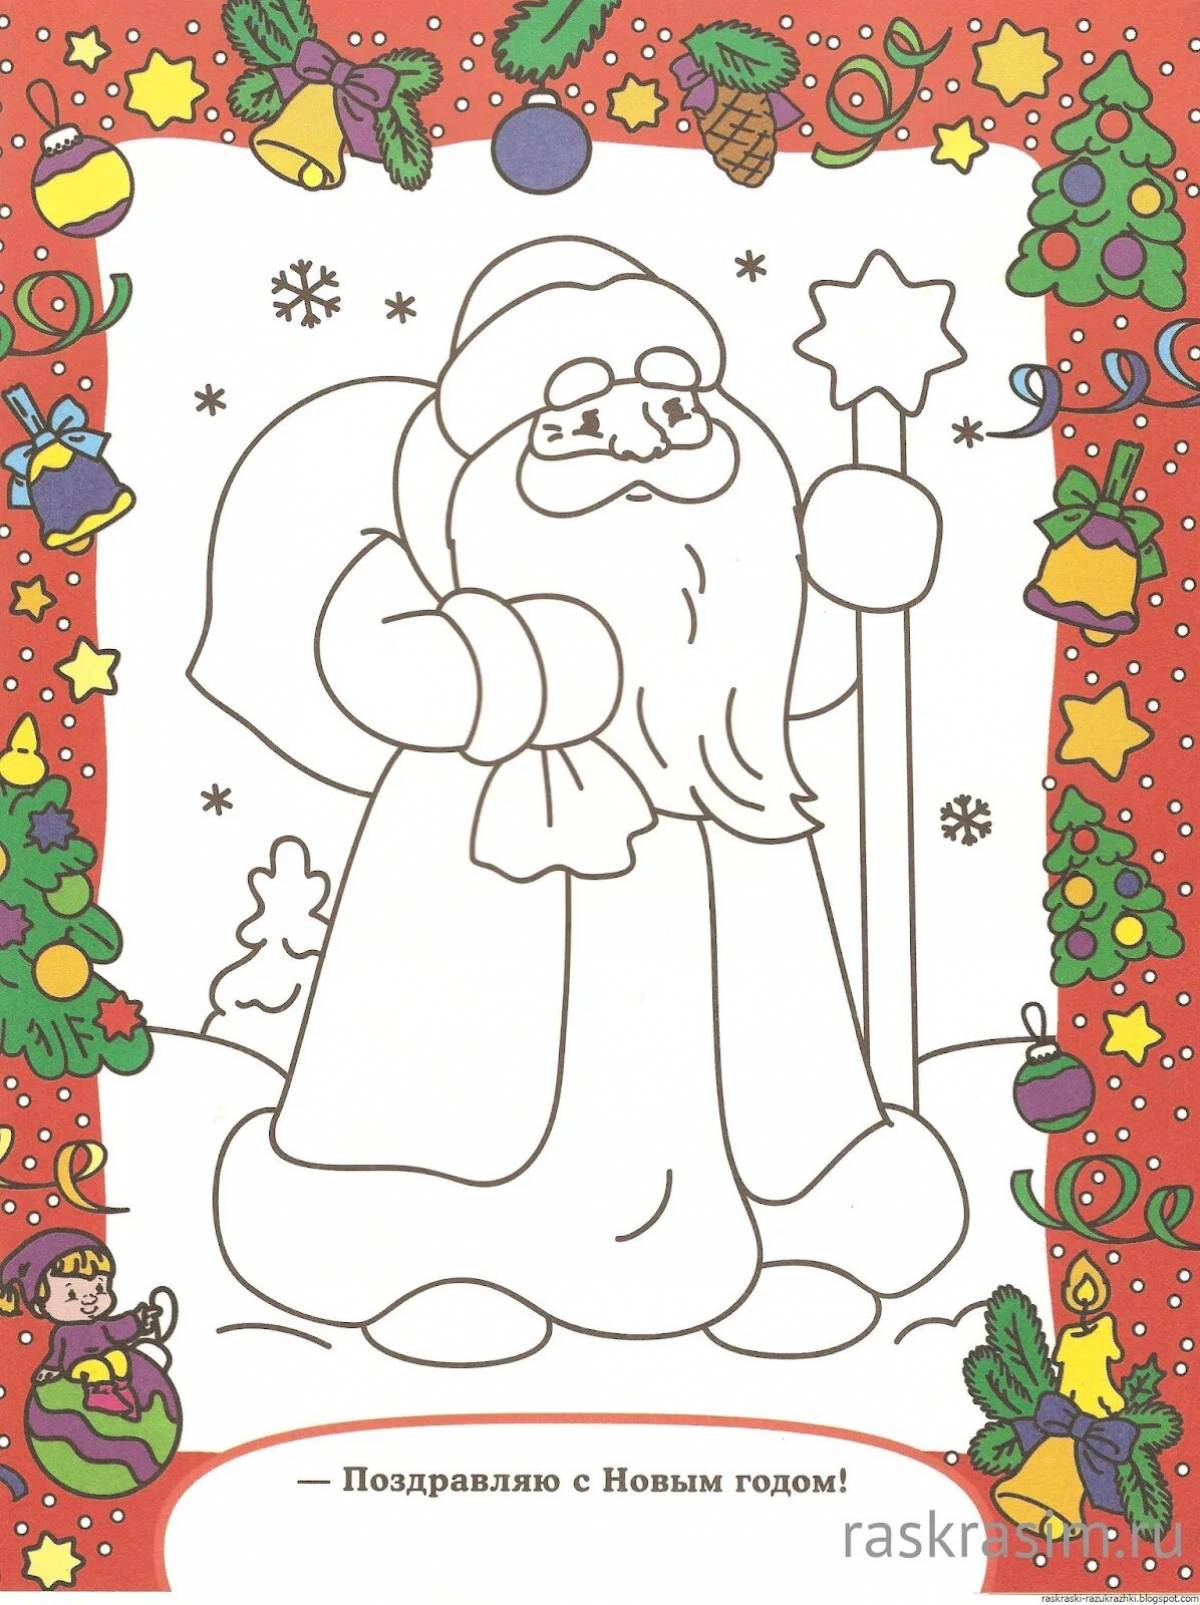 Impressive frost coloring book for kids